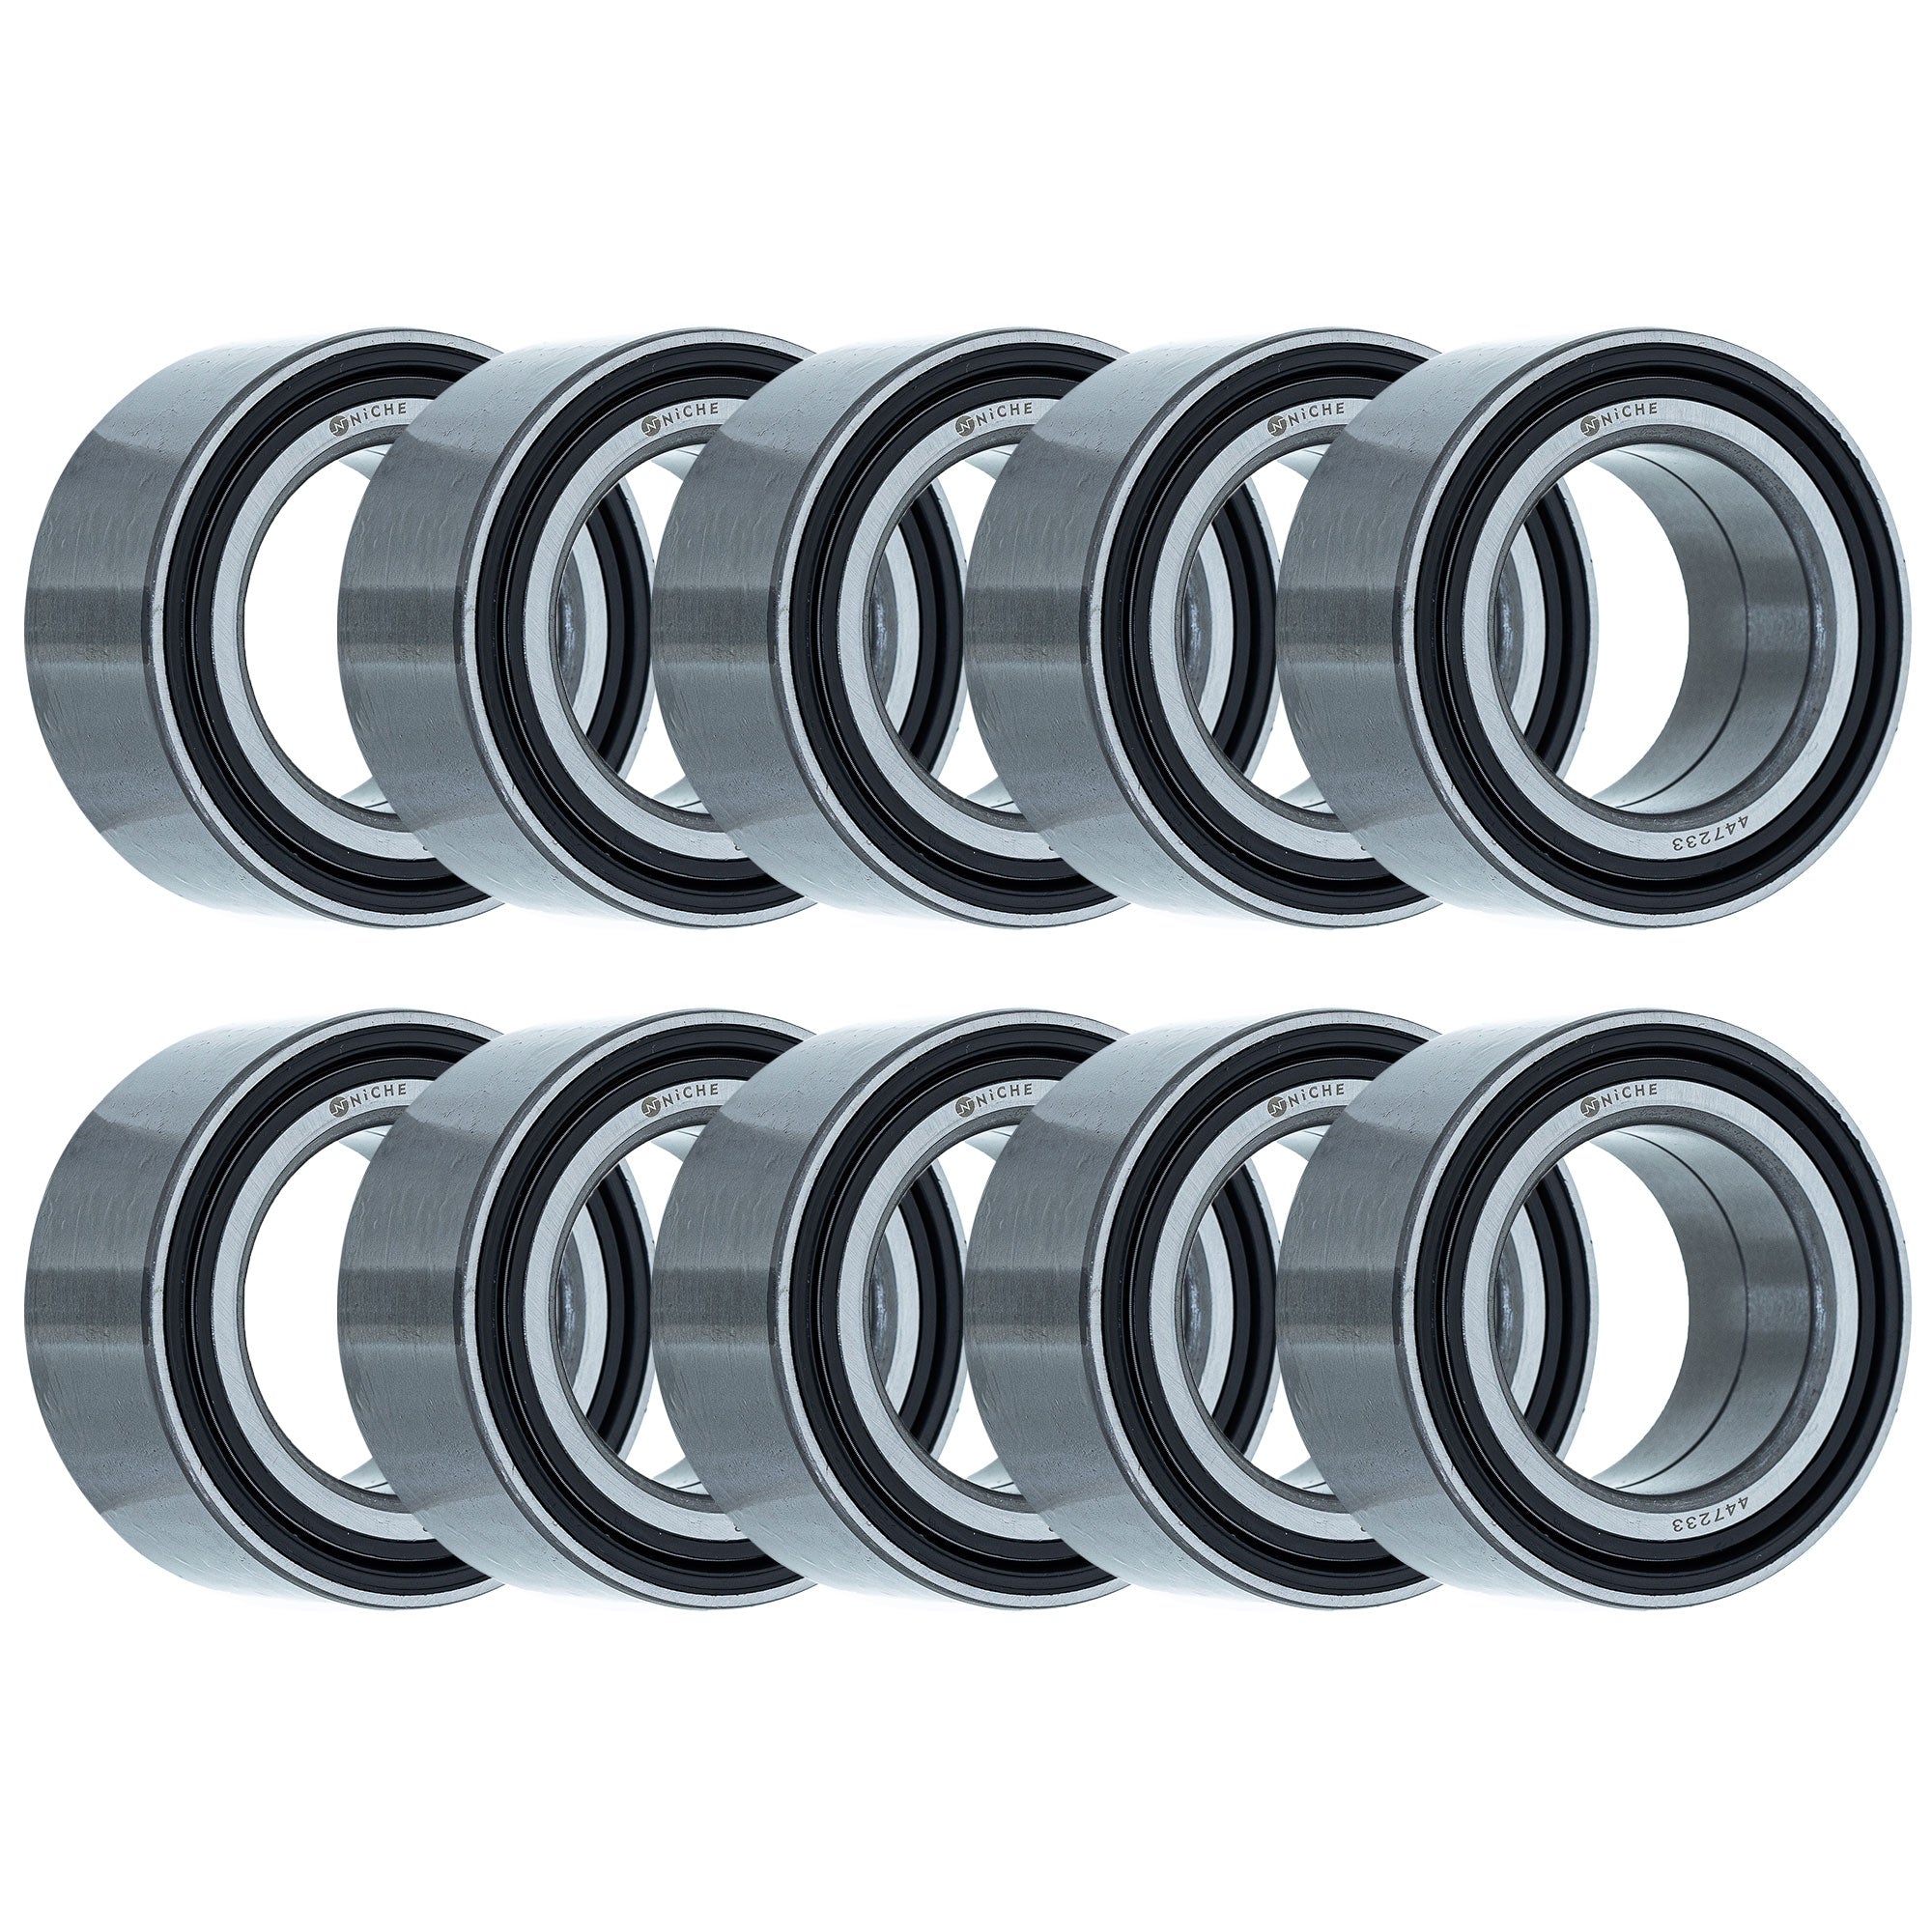 Double Row, Angular Contact, Ball Bearing Pack of 10 10-Pack for zOTHER Stateline Sabre NICHE 519-CBB2239R